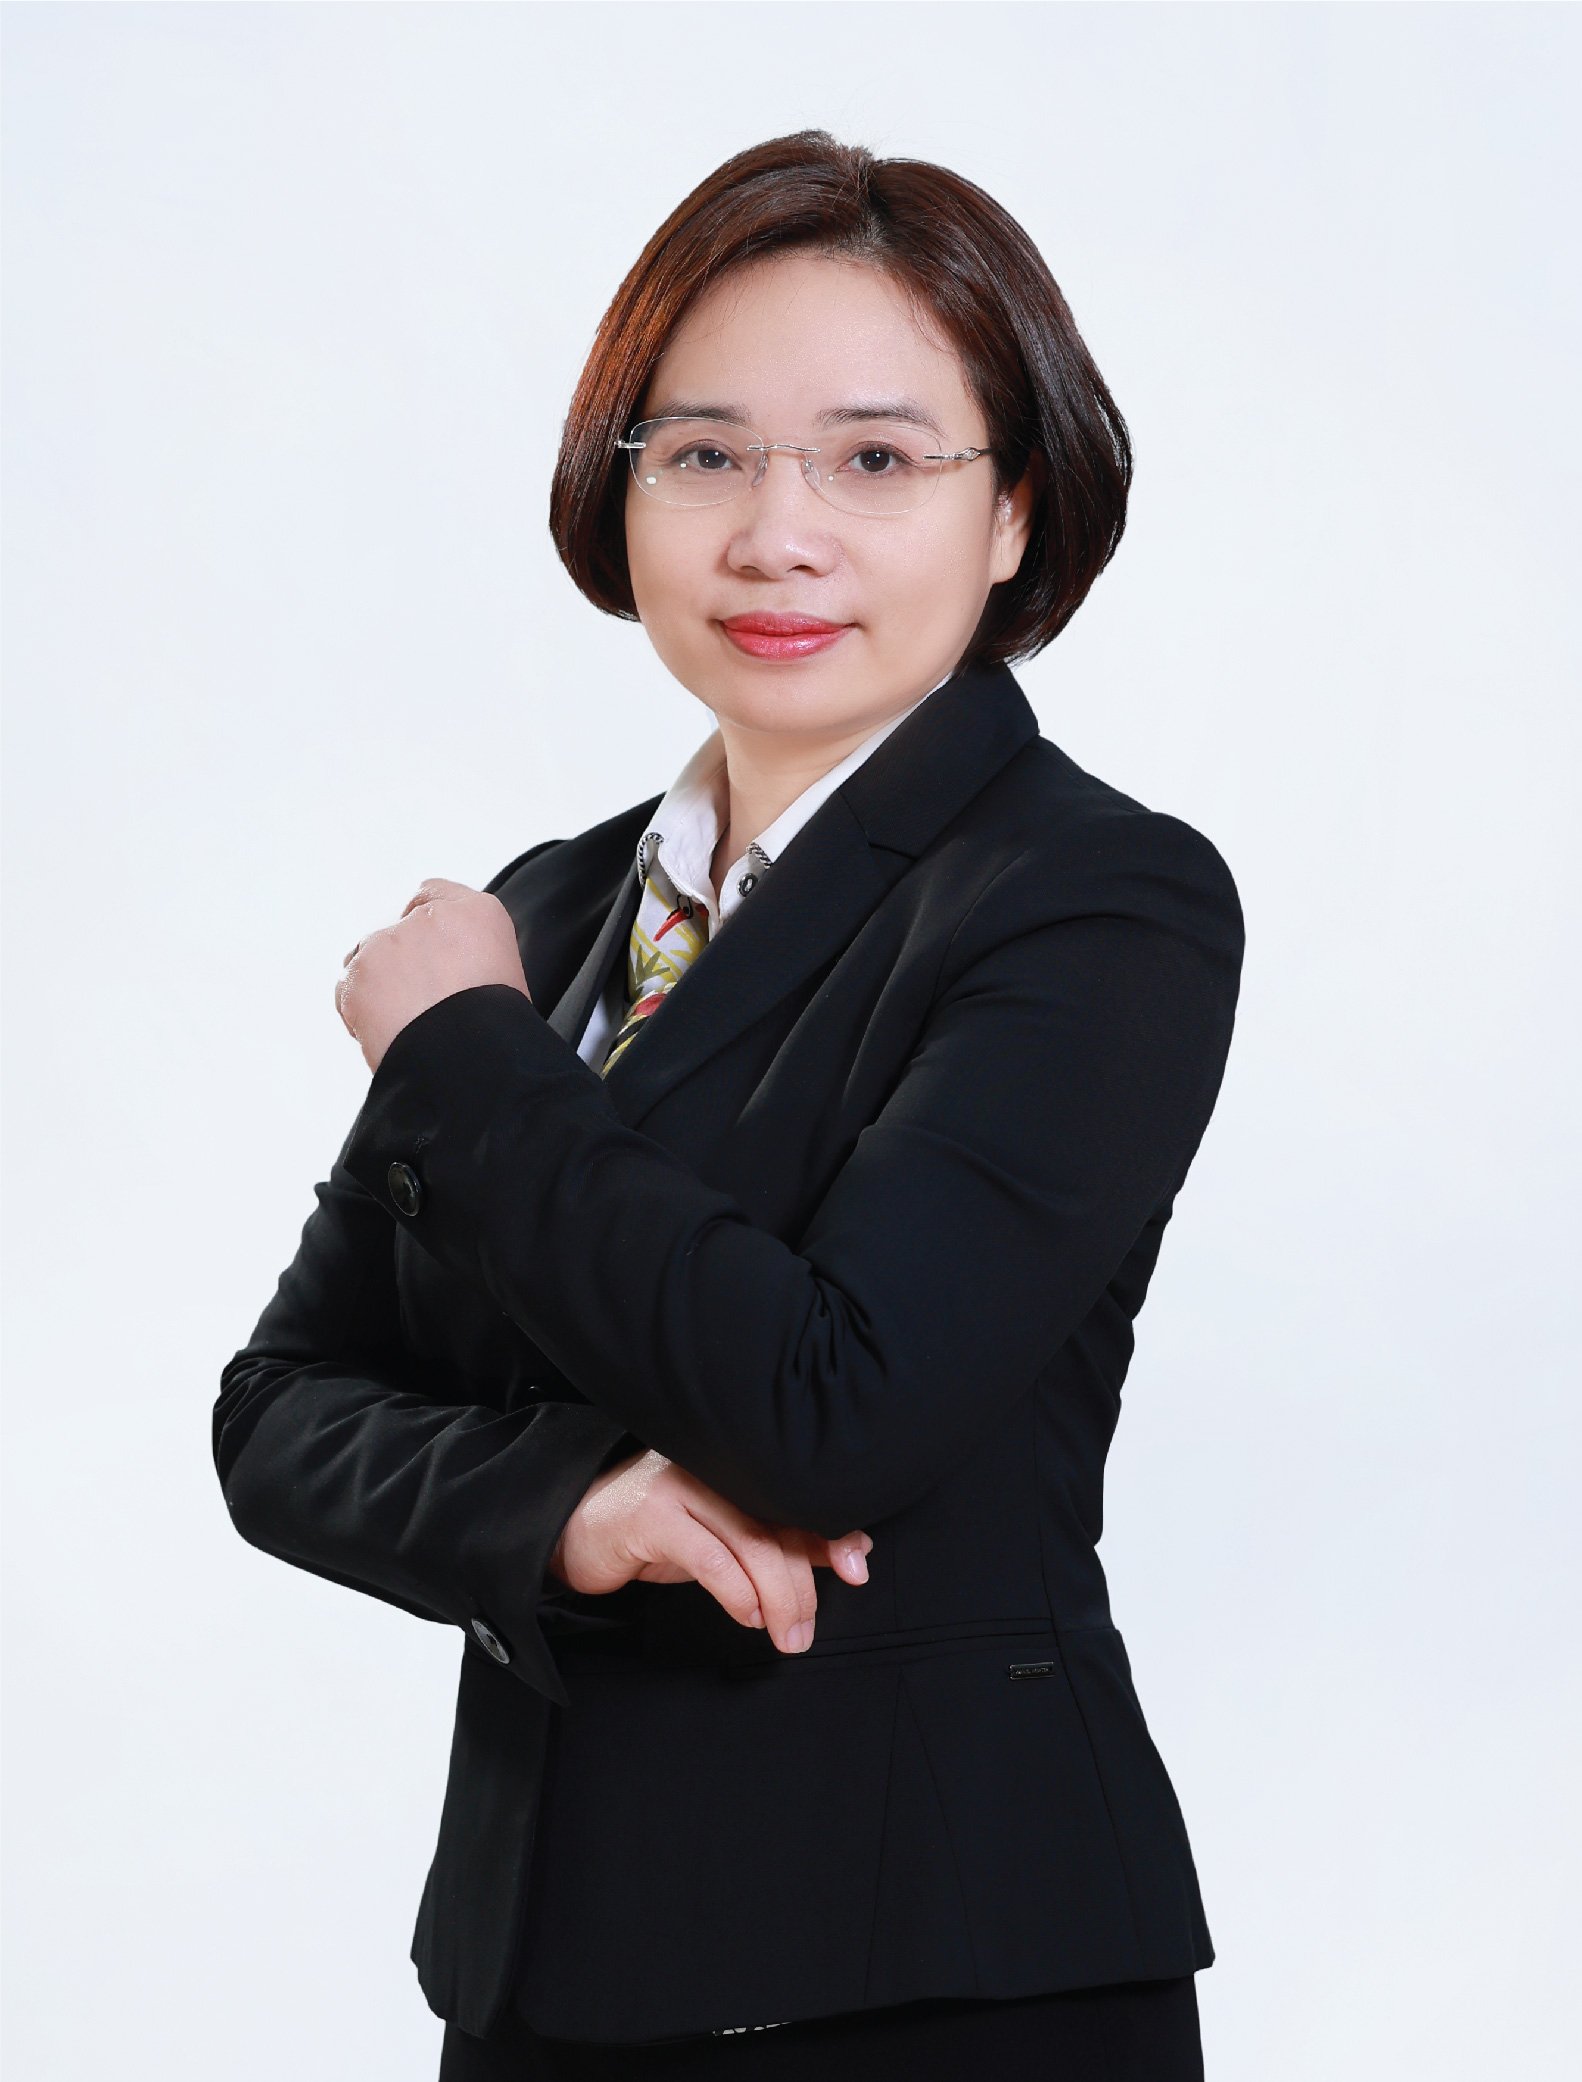 Ms. Dinh Phuong Thao